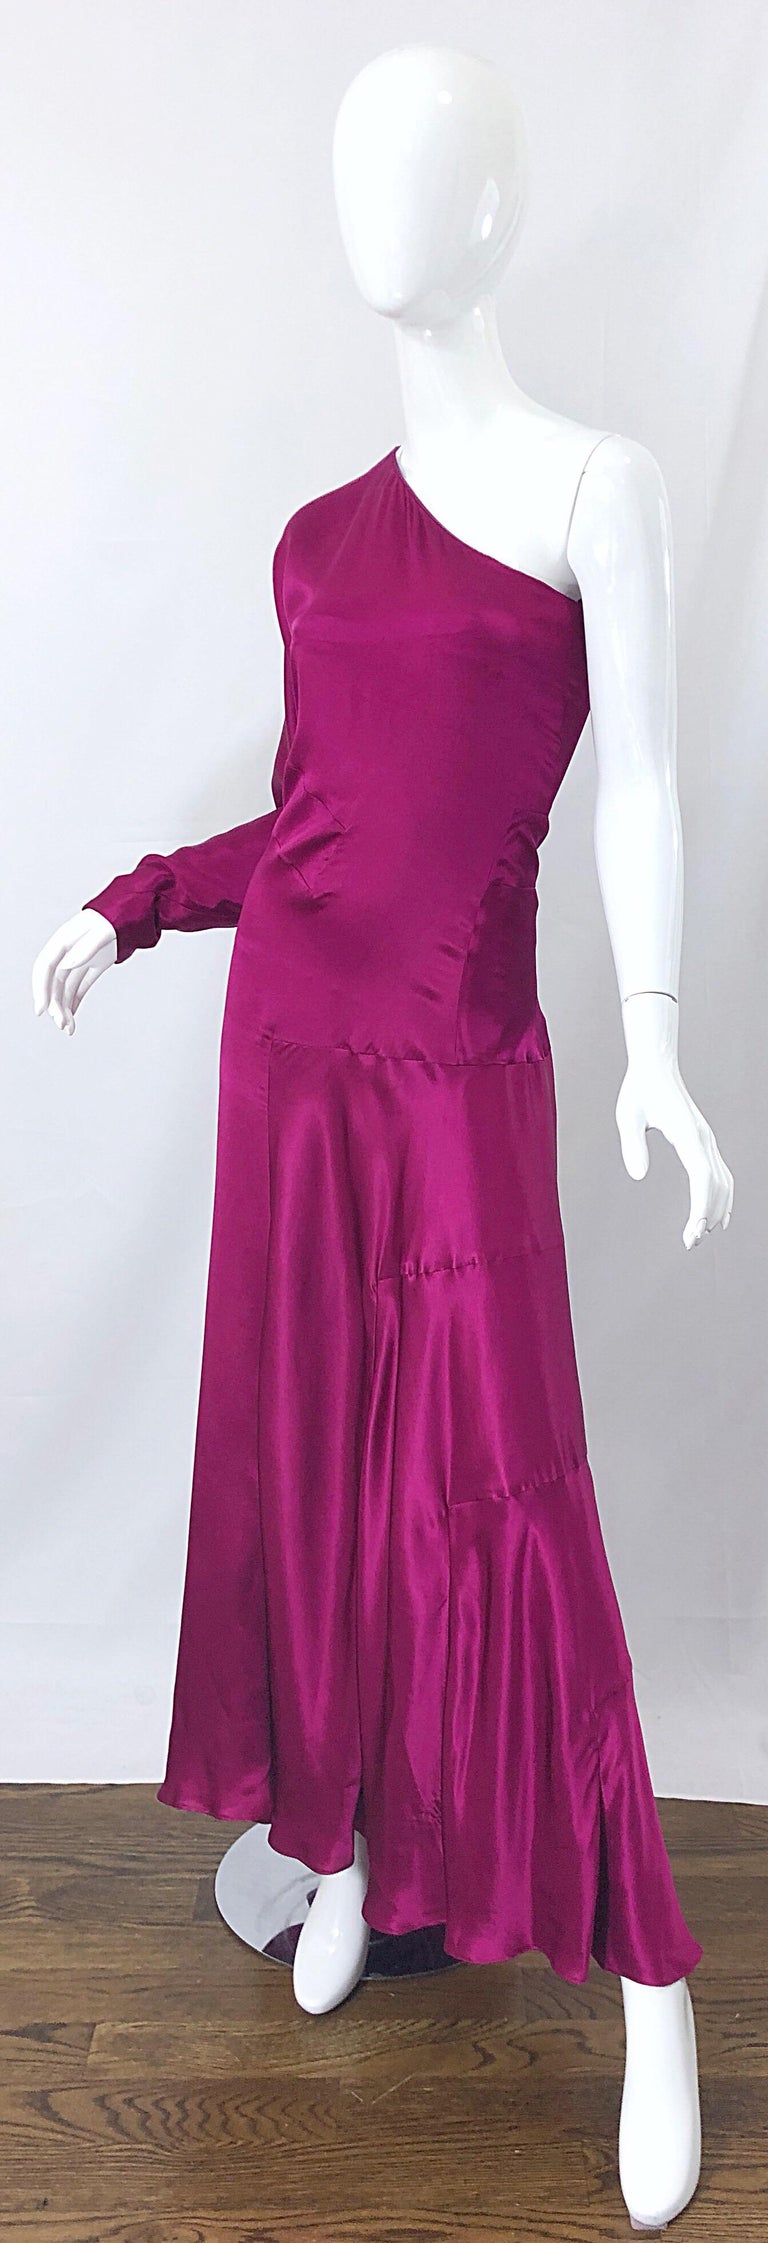 Yves Saint Laurent SS 2008 Kate Moss Sz 40 / 8 One Shoulder Silk Rasperry Gown For Sale 4